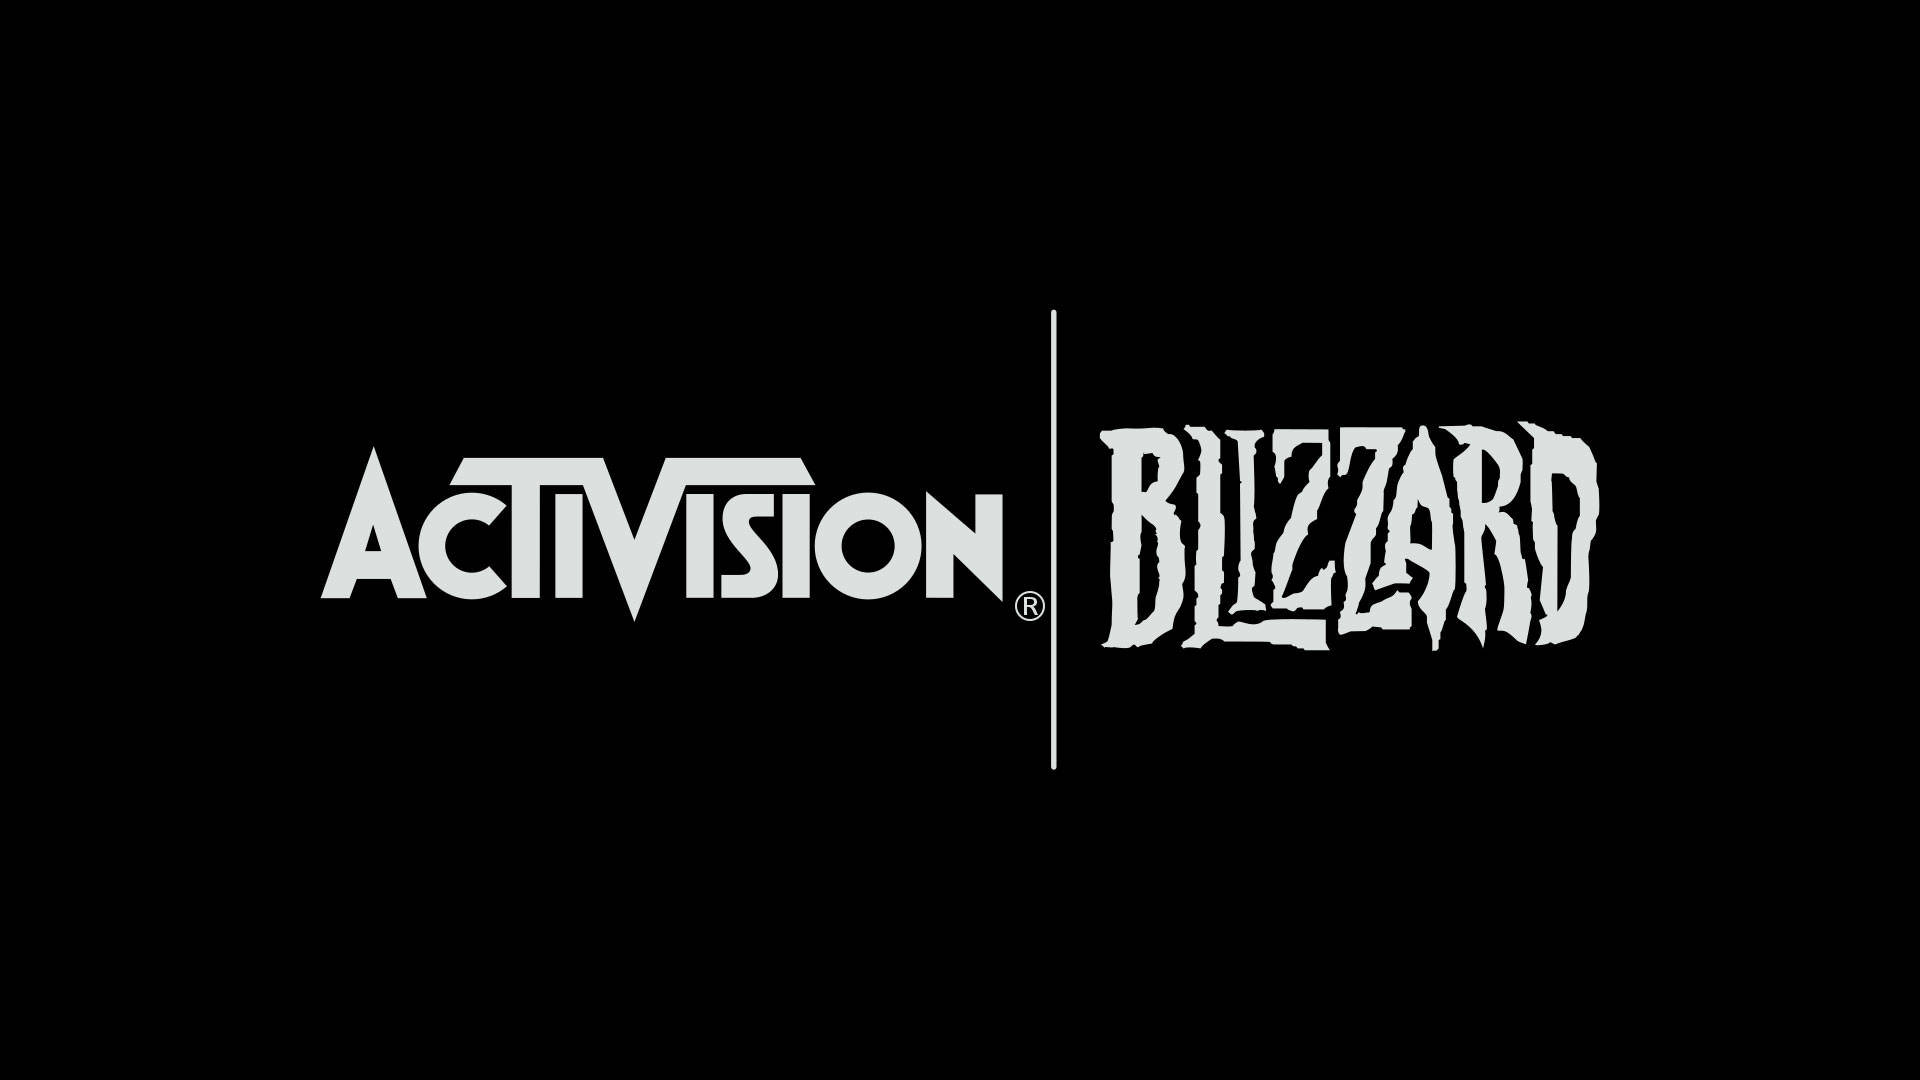 A group of Activision Blizzard employees have formed an anti-discrimination committee | VGC